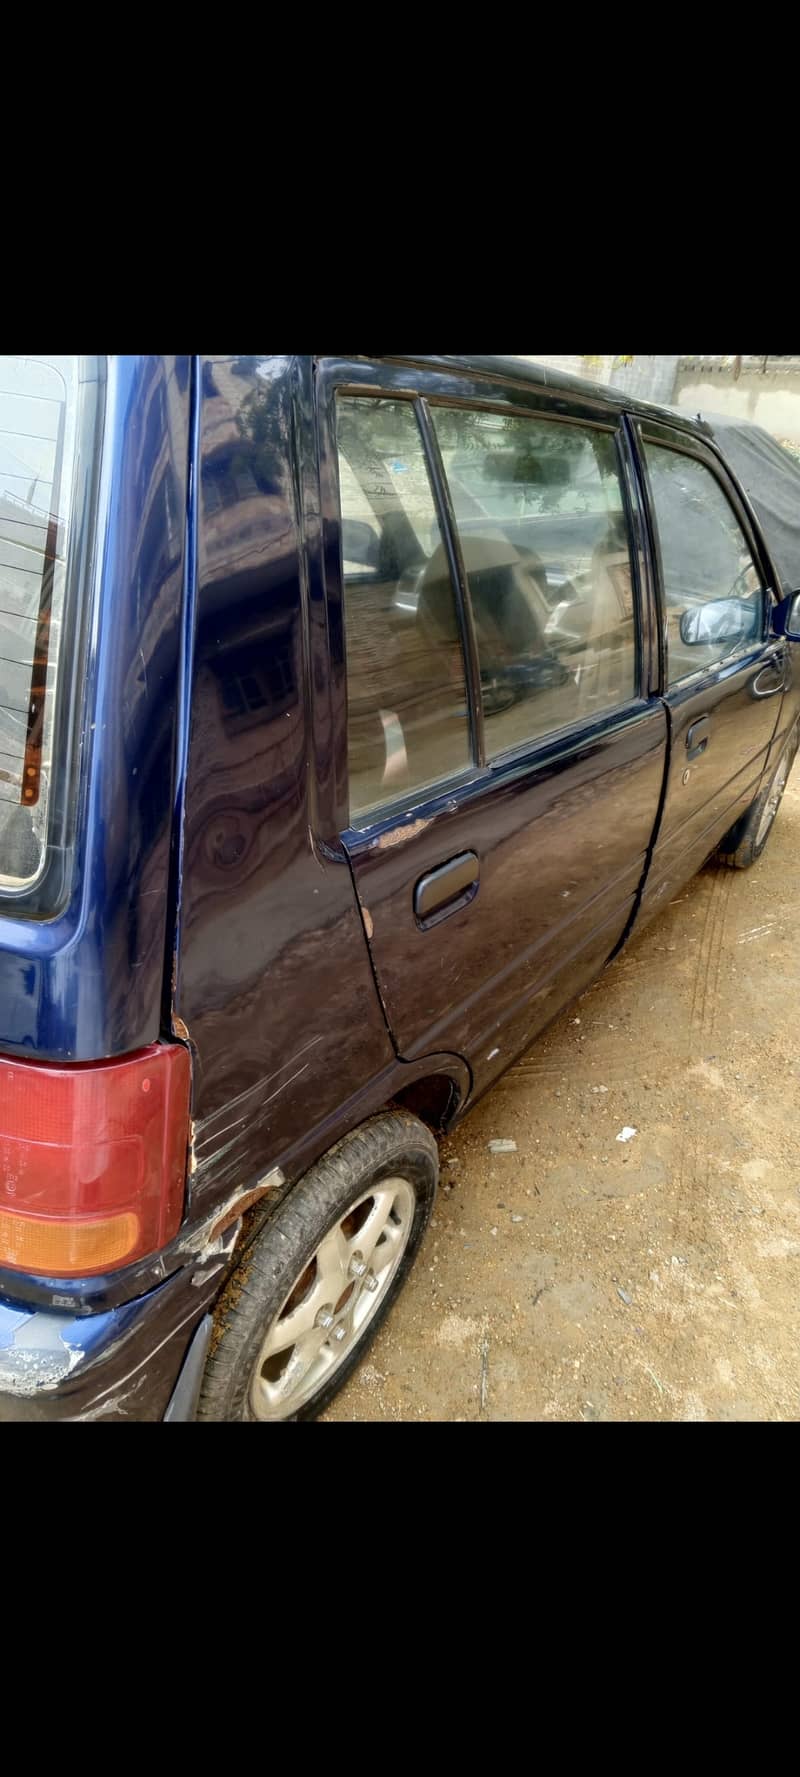 Mira car for sale 93 model cplc clear 6